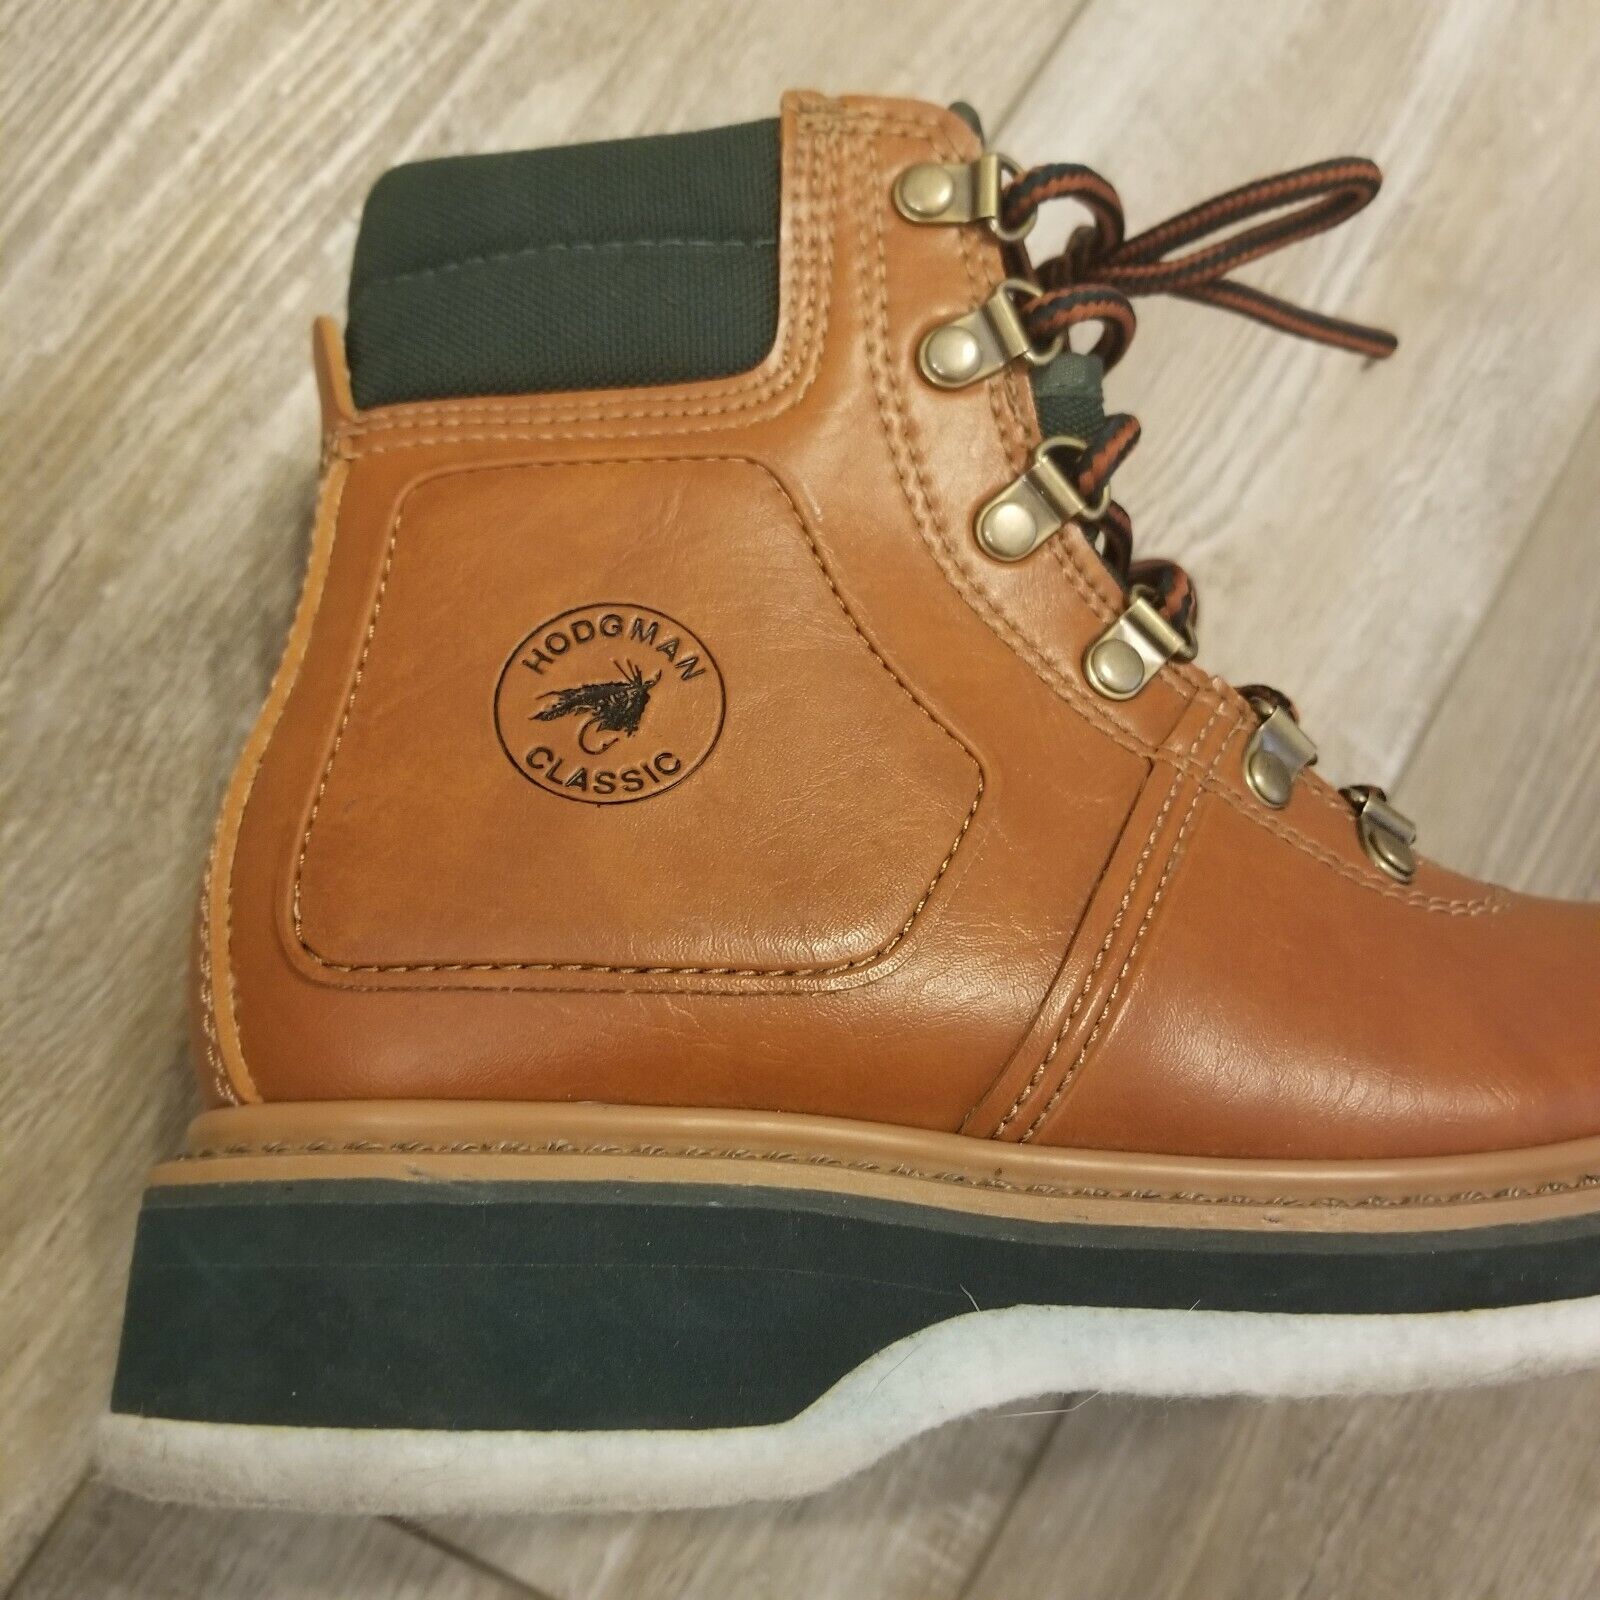 Fort Worth Mall Hodgman Classic In stock Wading Fly Fishing Brown Sole Felt Leather Boots